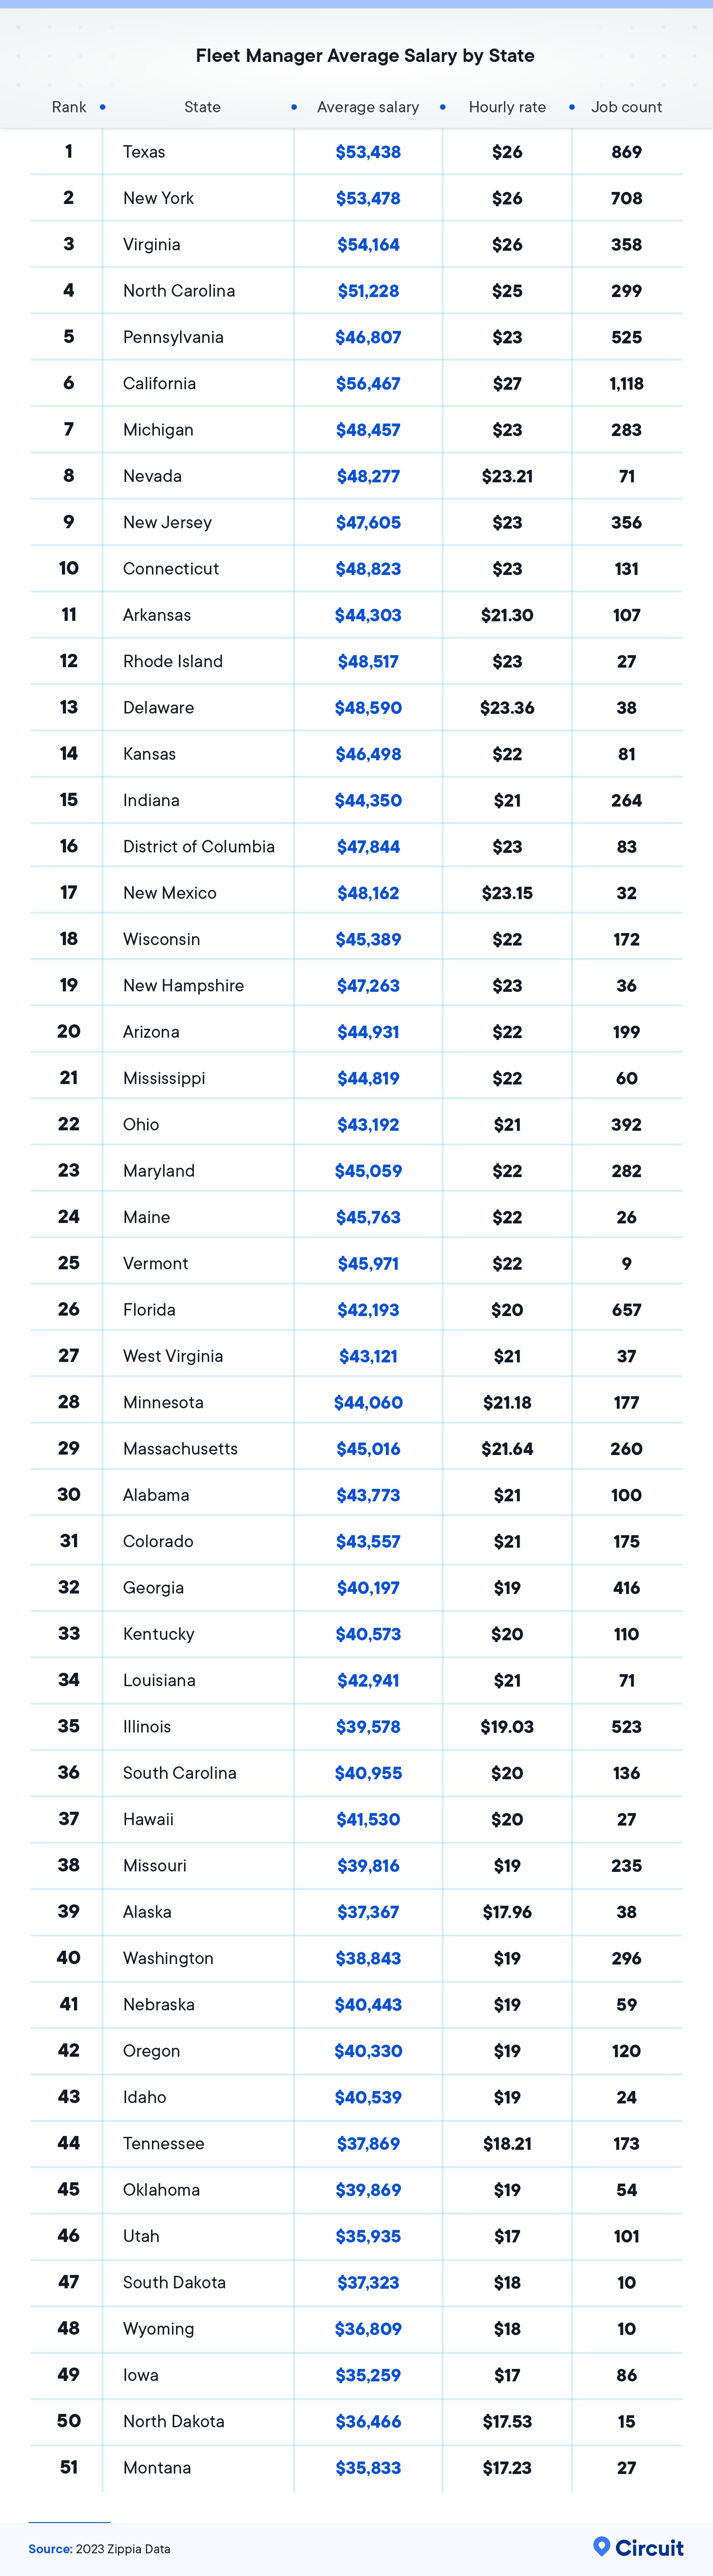 Fleet manager average salary by state